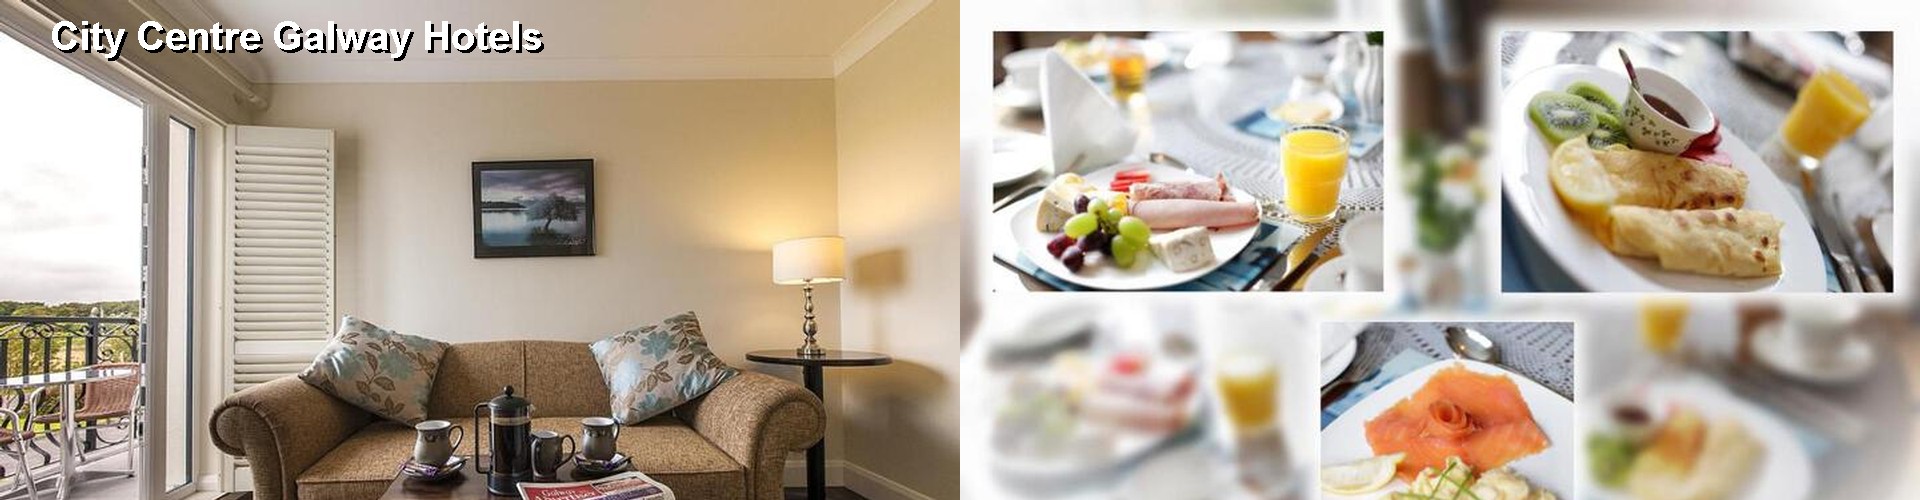 5 Best Hotels near City Centre Galway